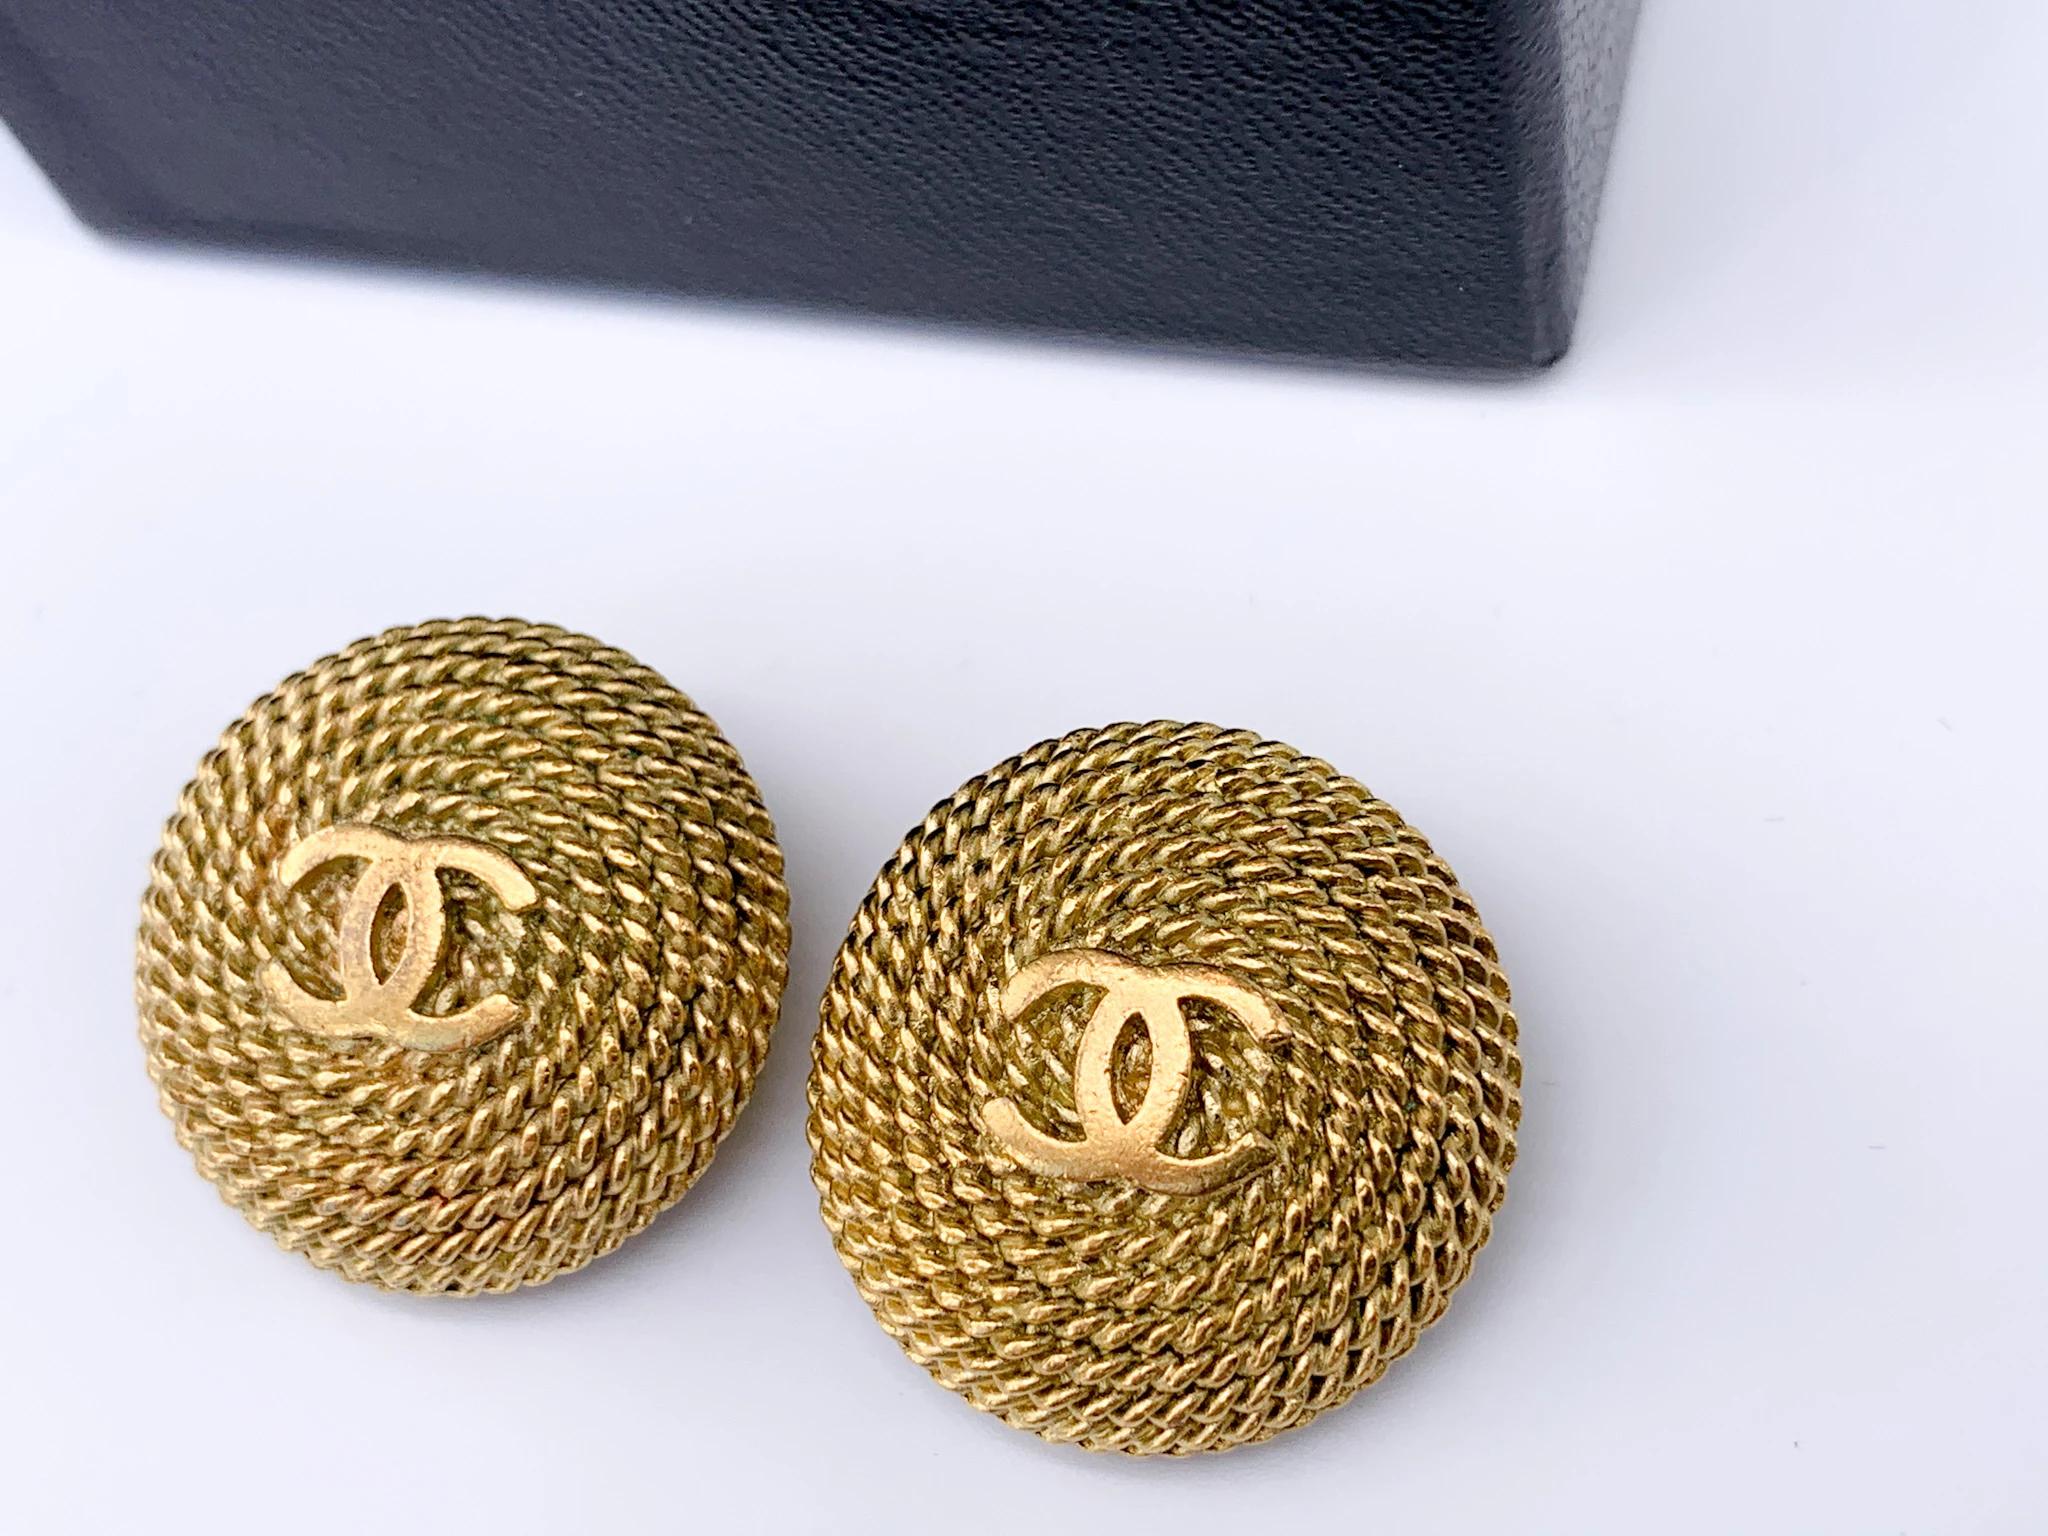 Chanel 1990s Vintage Clip On Earrings

Timelessly elegant earrings from the 90s chanel archive. This style of chanel button style earrings have become a contemporary wardrobe staple for style lovers everywhere.

Detail
-Made in France for the 1995